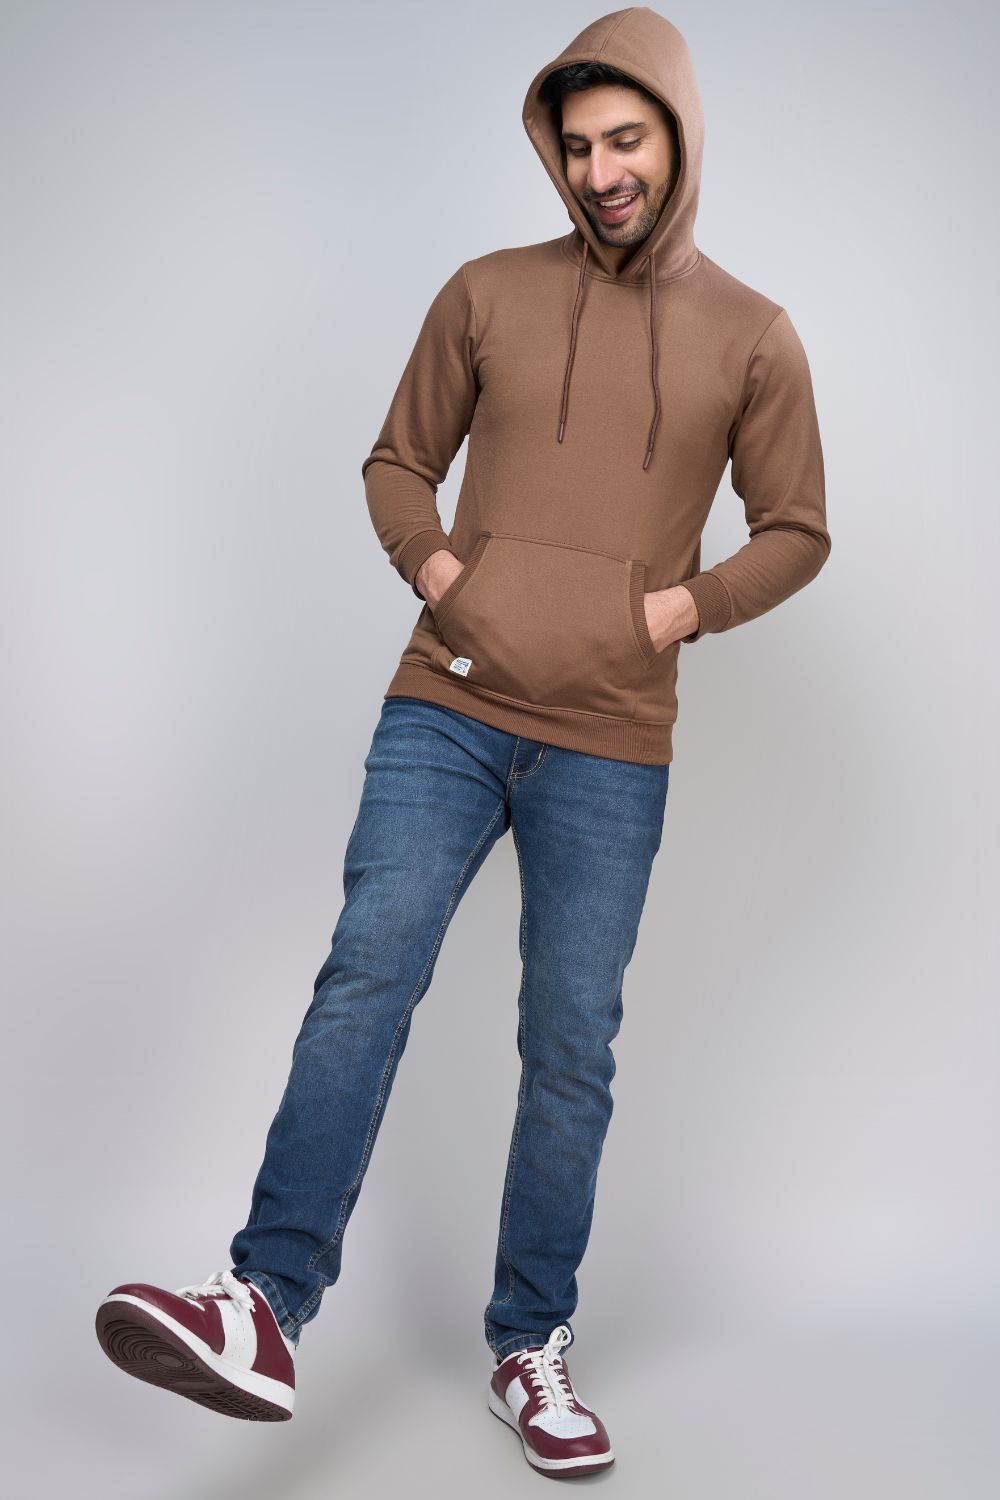 A model wearing Dark Tan colored, hoodie for men with full sleeves and relaxed fit.